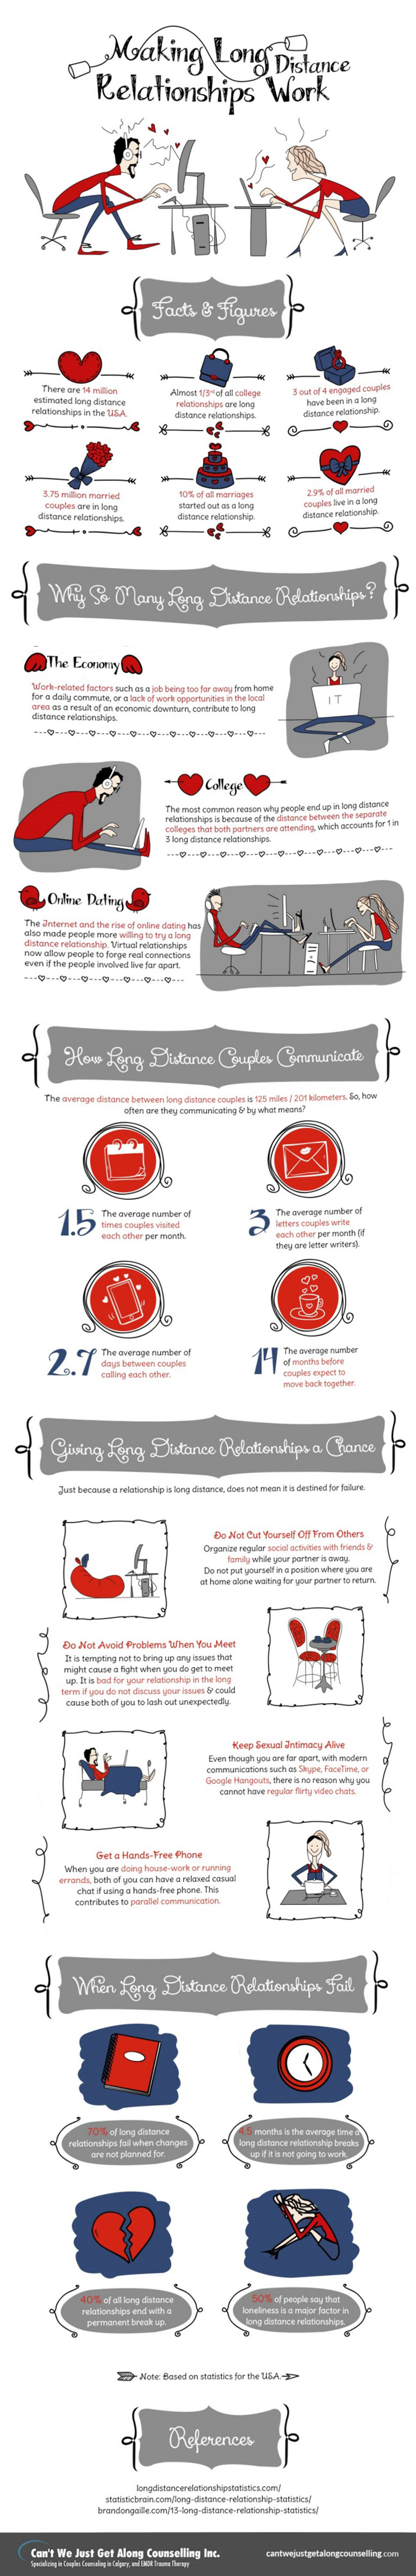 Making Long Distance Relationships Work - Dating Infographic